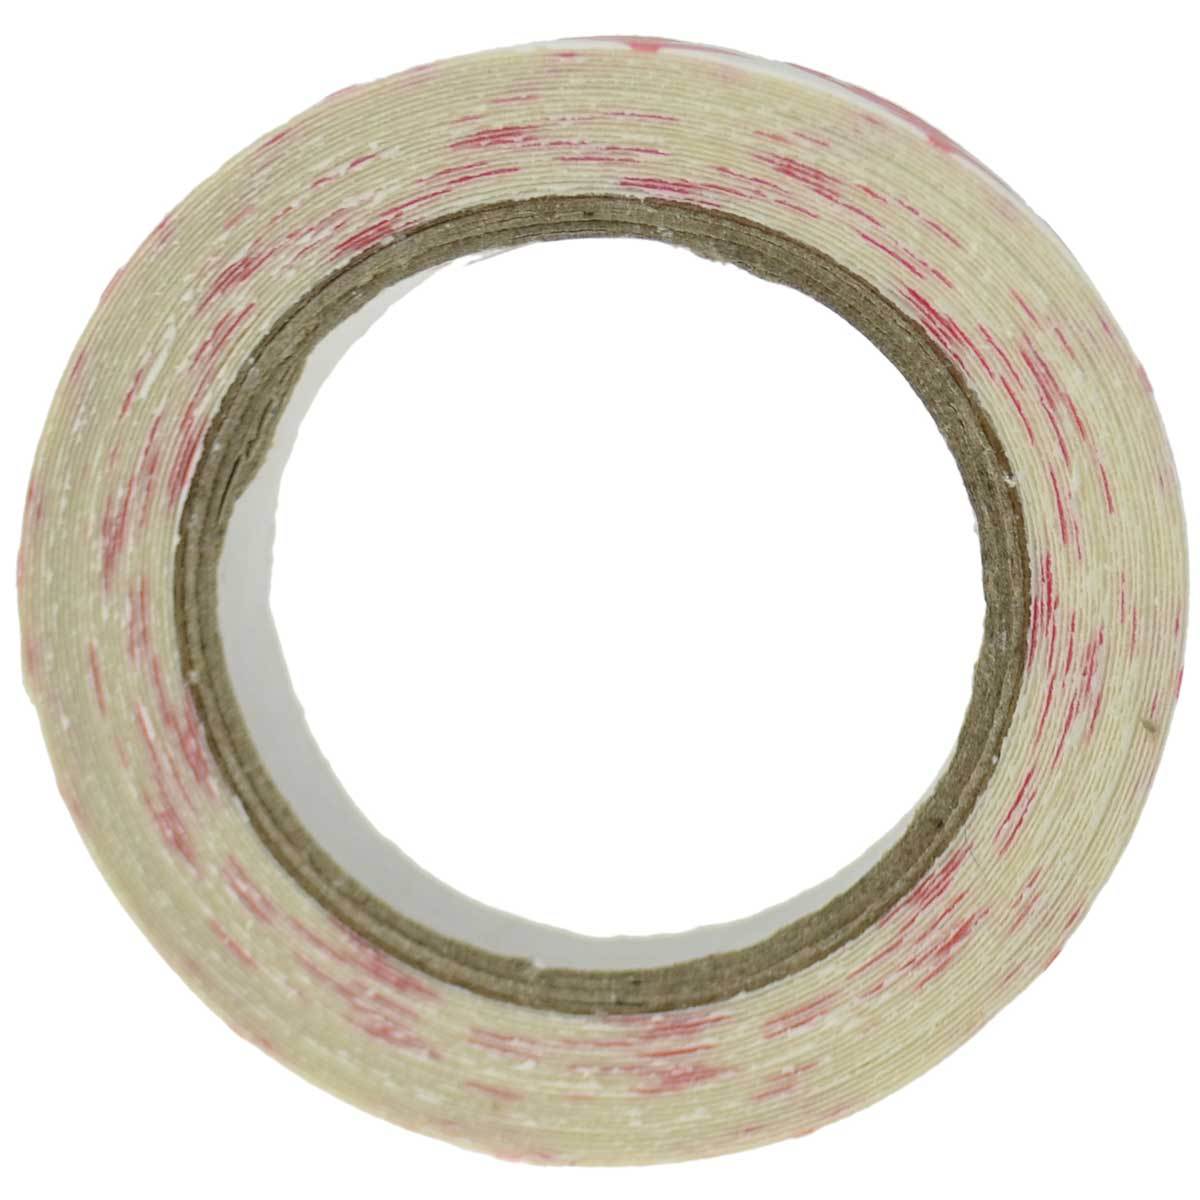 1 Roll Pink U-Shaped Foam Edge Protector 78.7 inches (2 meters)